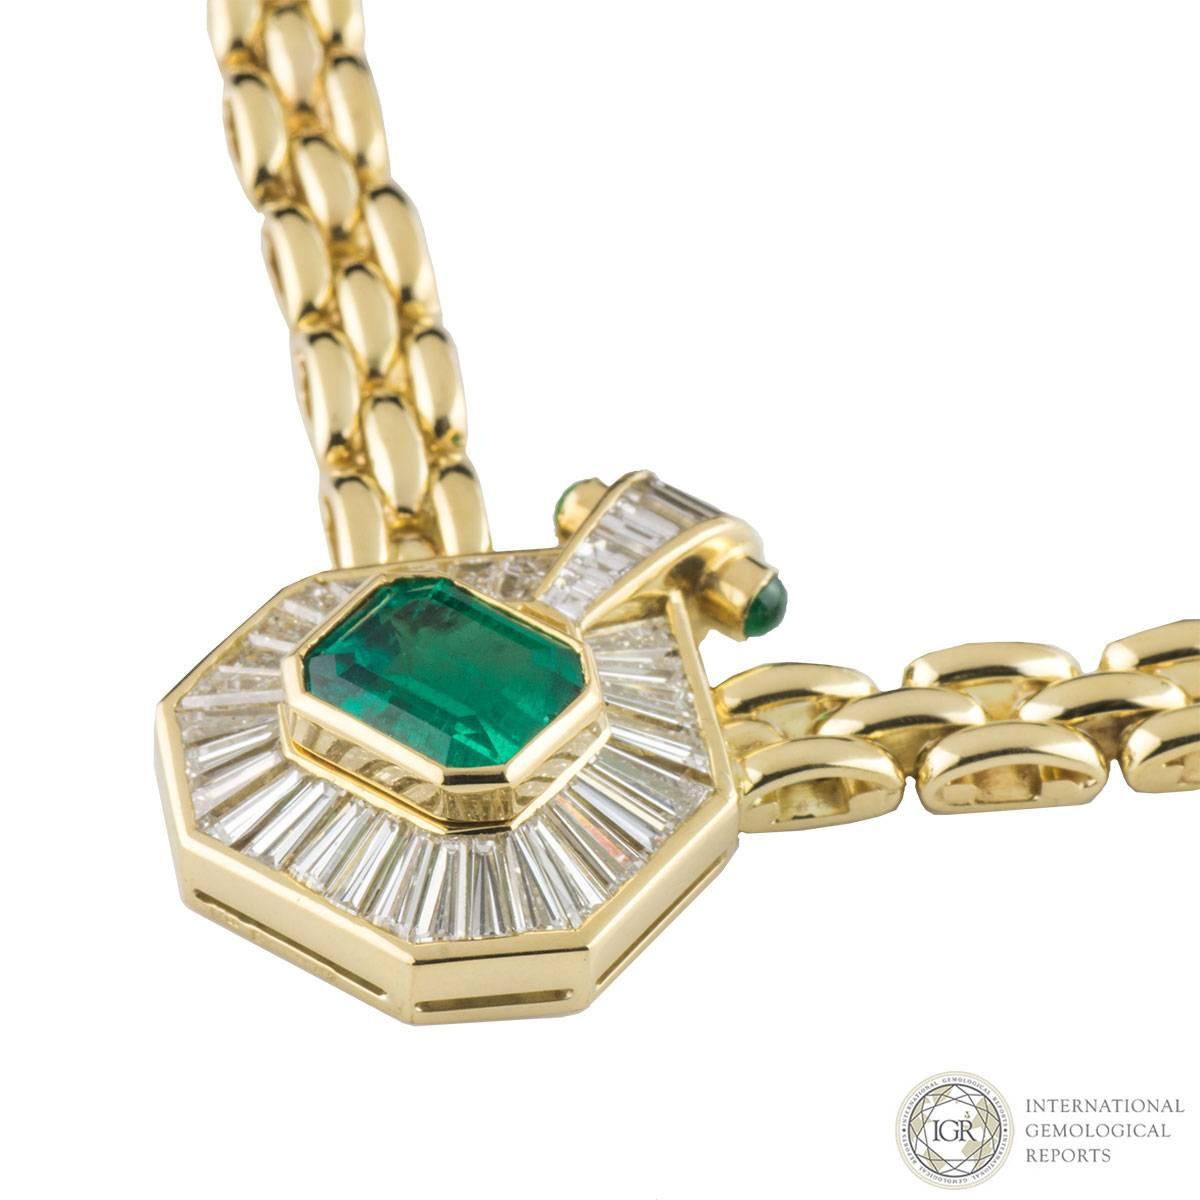 A beautiful 18k yellow gold emerald and diamond necklace. The necklace comprises of an octagonal emerald cut emerald with a weight of 2.84ct, with a strong bright green hue throughout, Type III and VS clarity. Surrounding this emerald are round